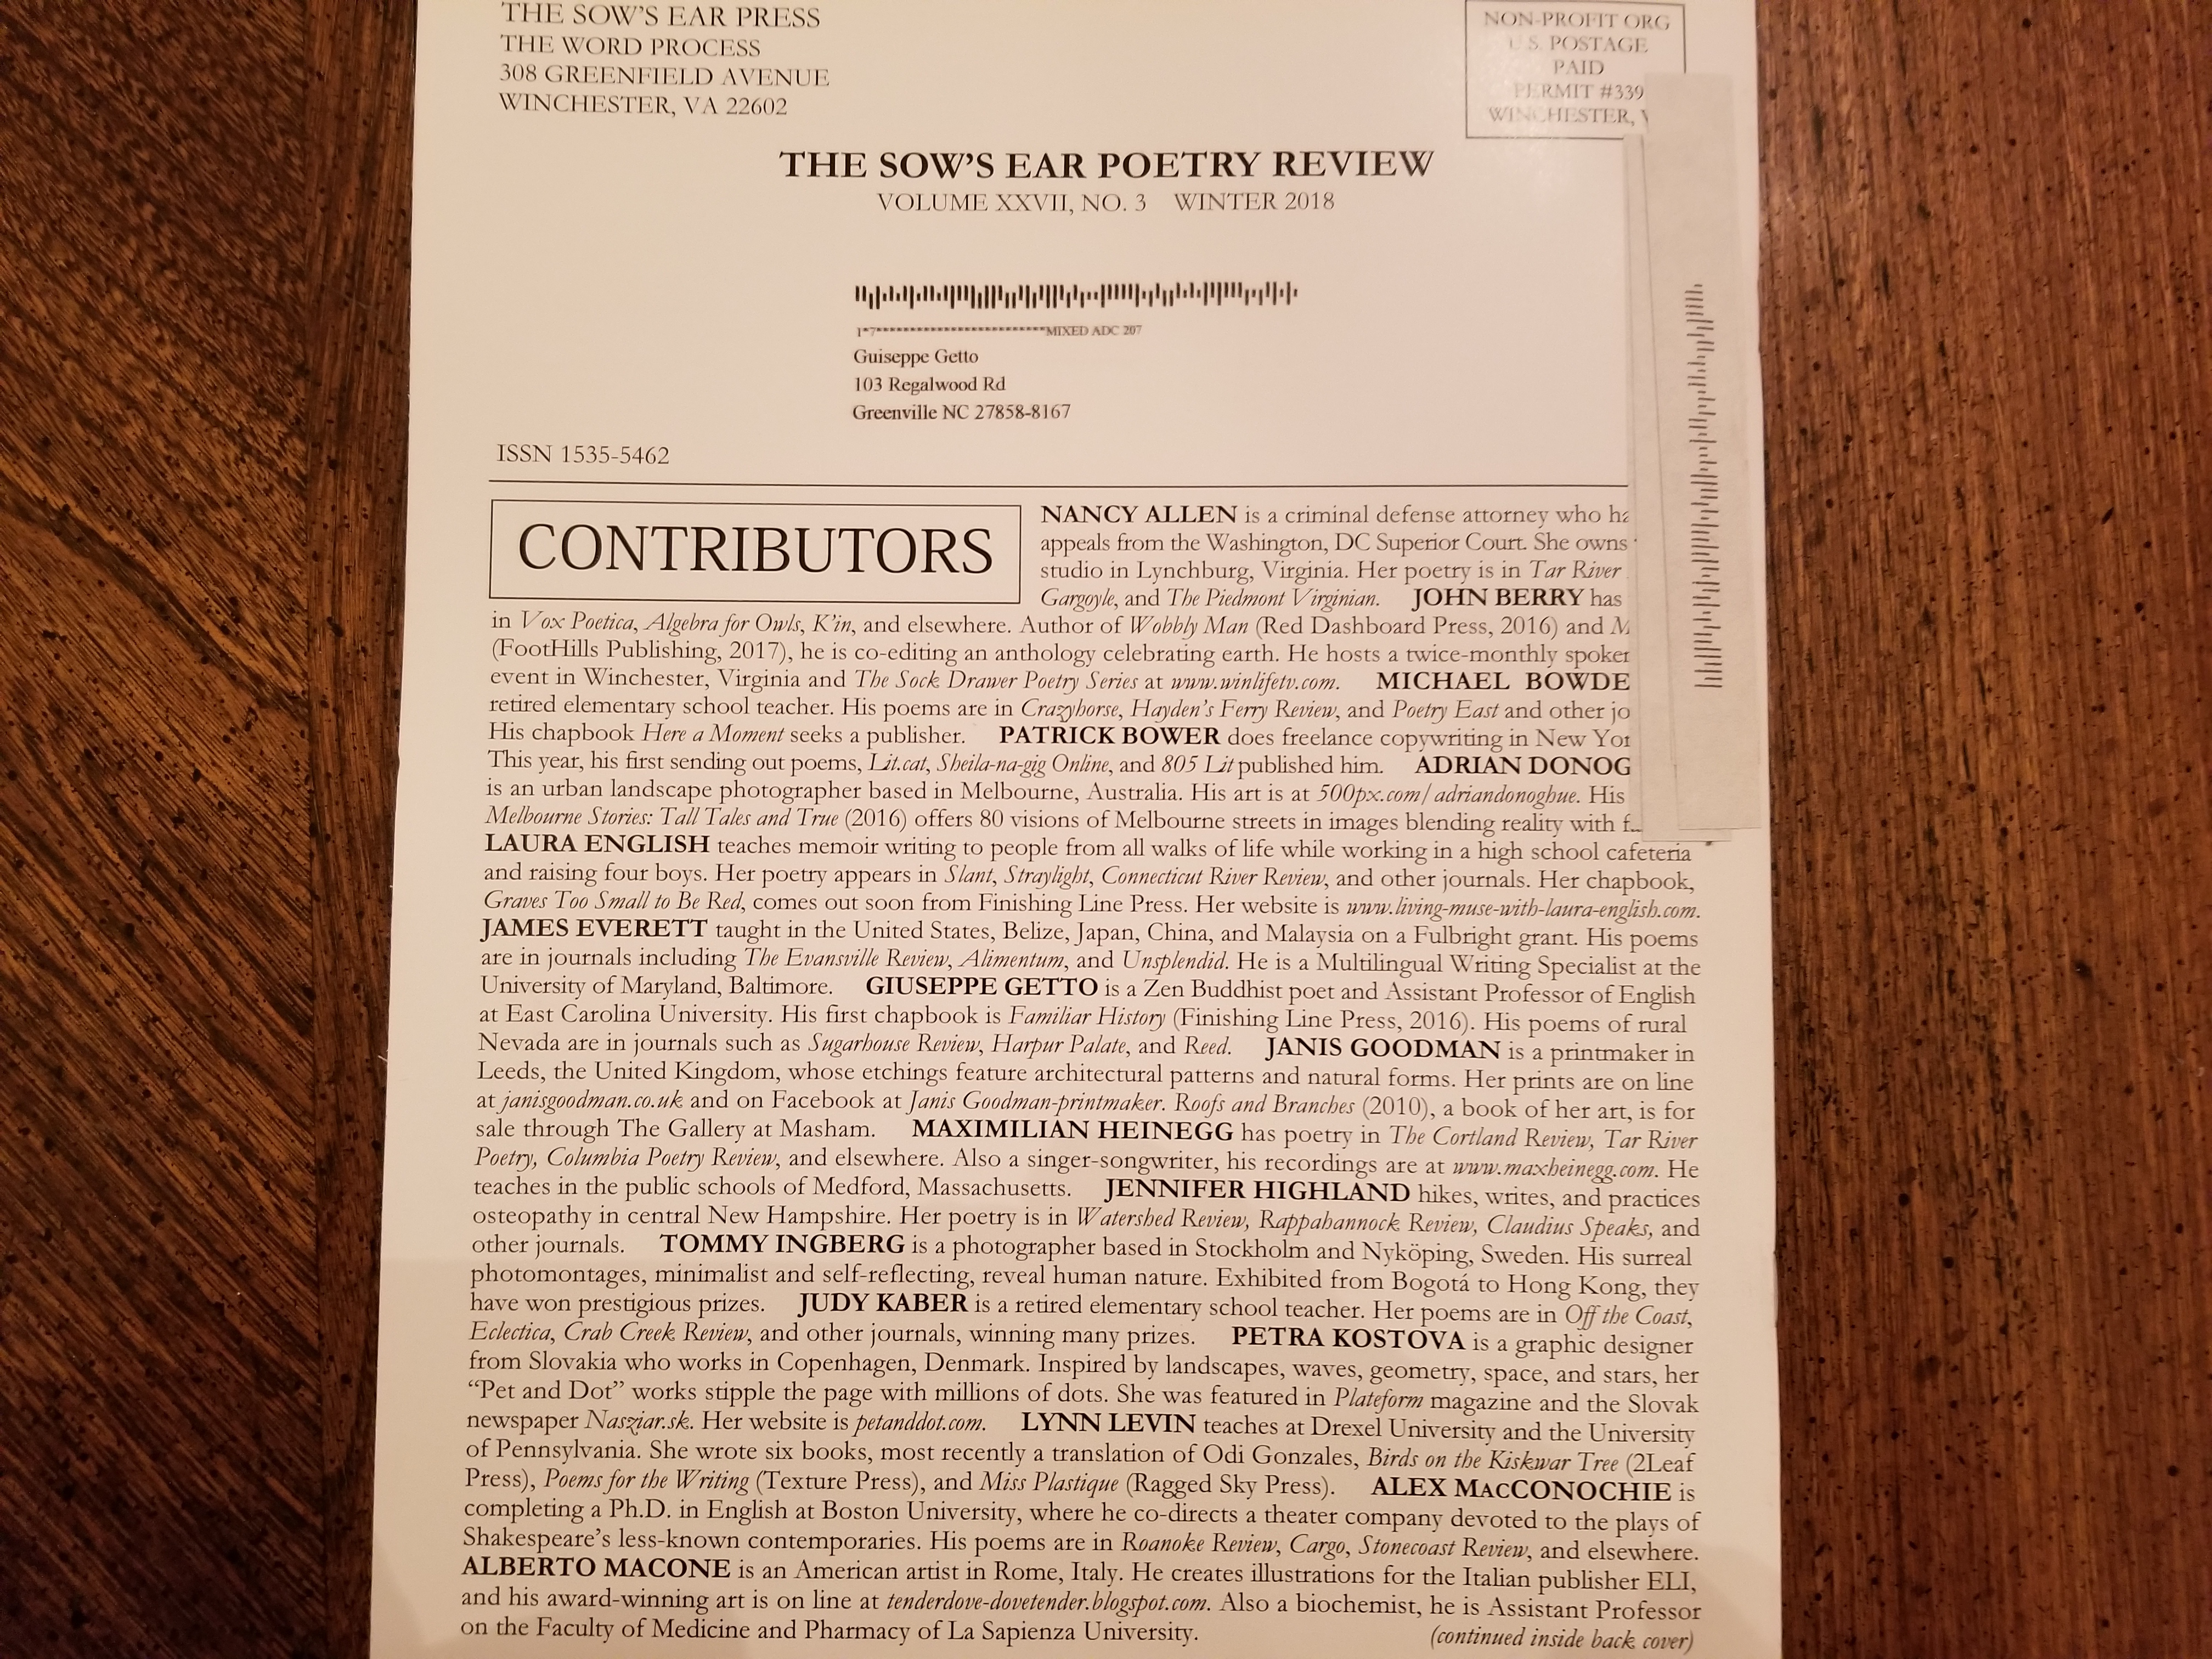 A photo of issue 27.3 of Sow's Ear Poetry Review, published to: "A Metaphor for Mental Illness in Sow's Ear Poetry Review"